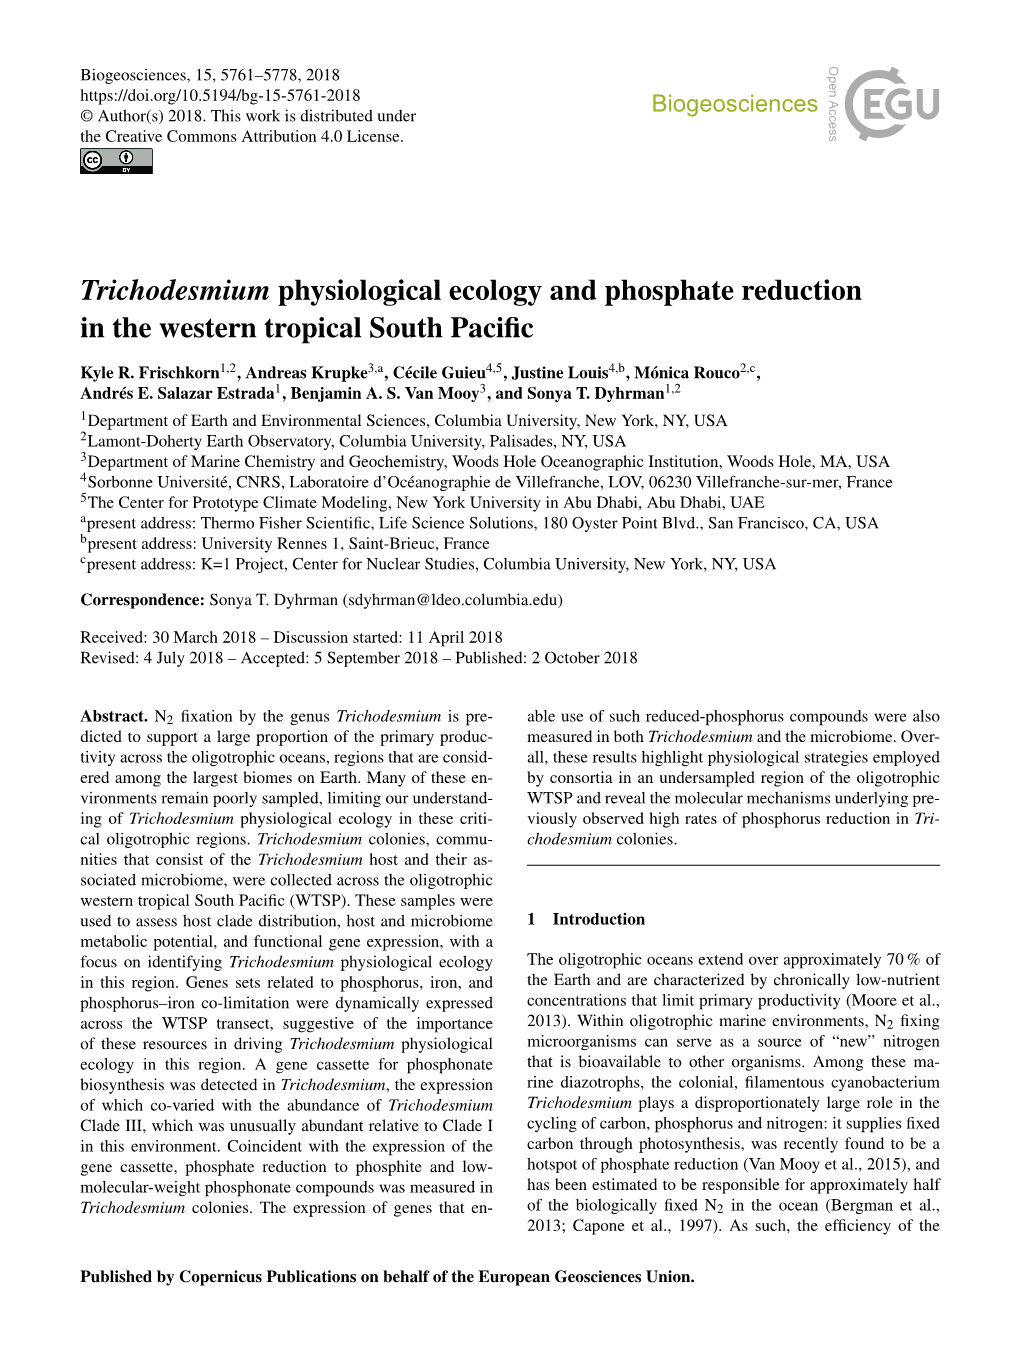 Trichodesmium Physiological Ecology and Phosphate Reduction in the Western Tropical South Paciﬁc